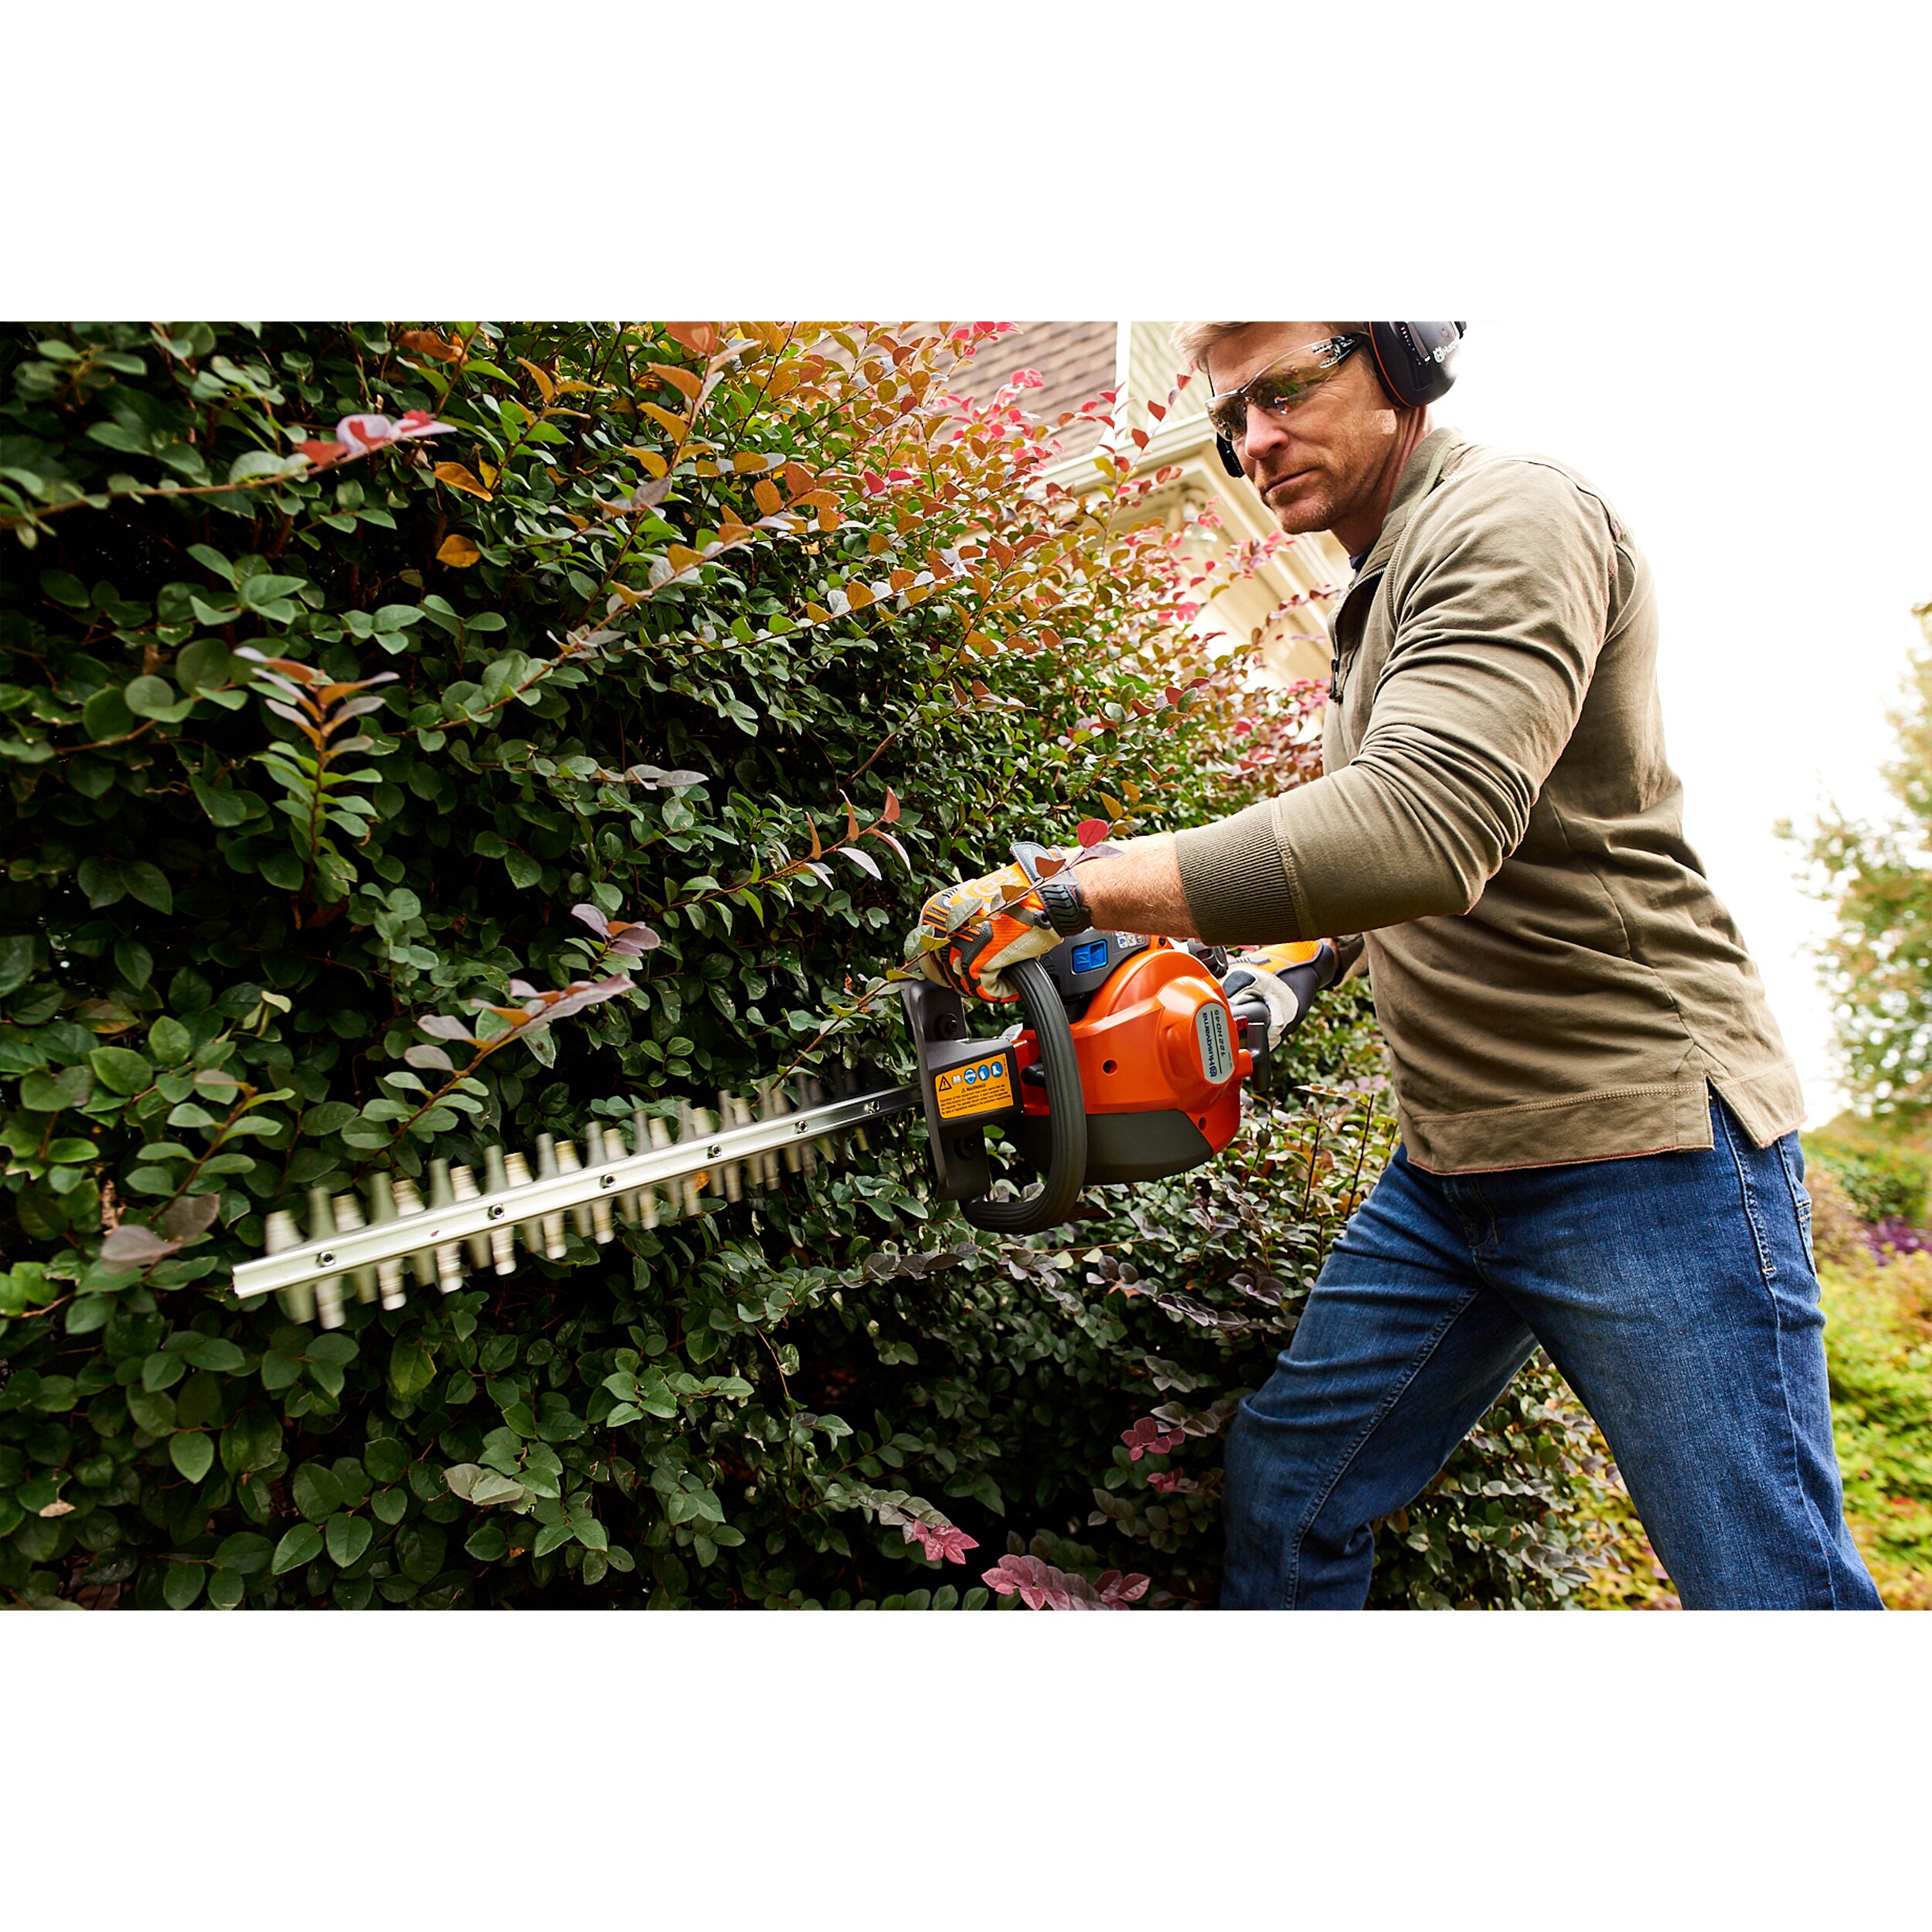 Husqvarna 122HD45 21-cc 2-cycle 18-in Gas Hedge Trimmer at